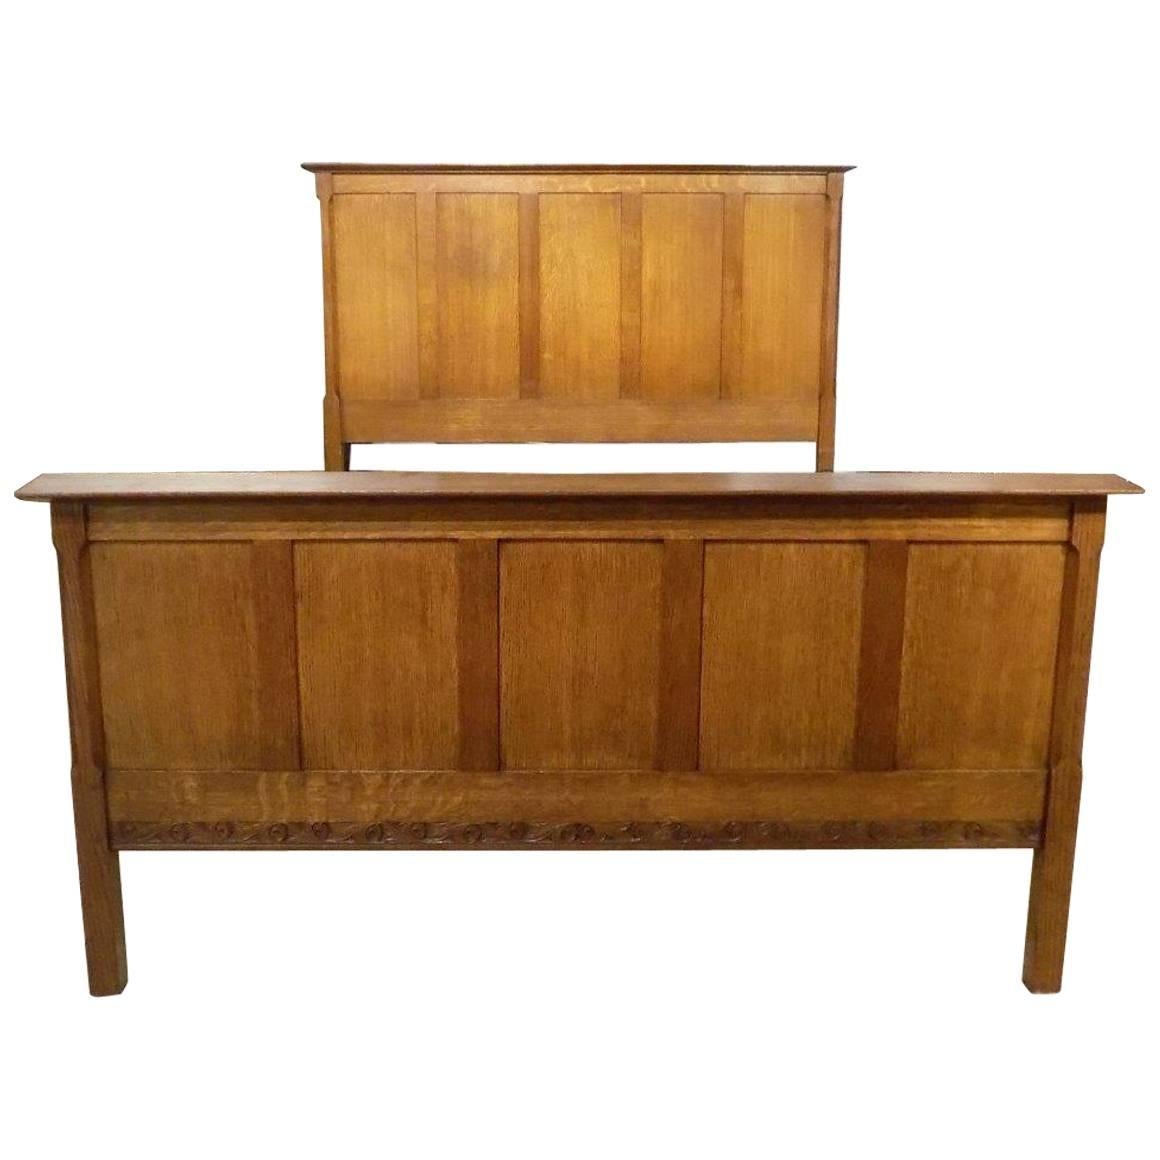 Rare Oak Arts & Crafts Period Double Bed by Arthur Simpson of Kendal